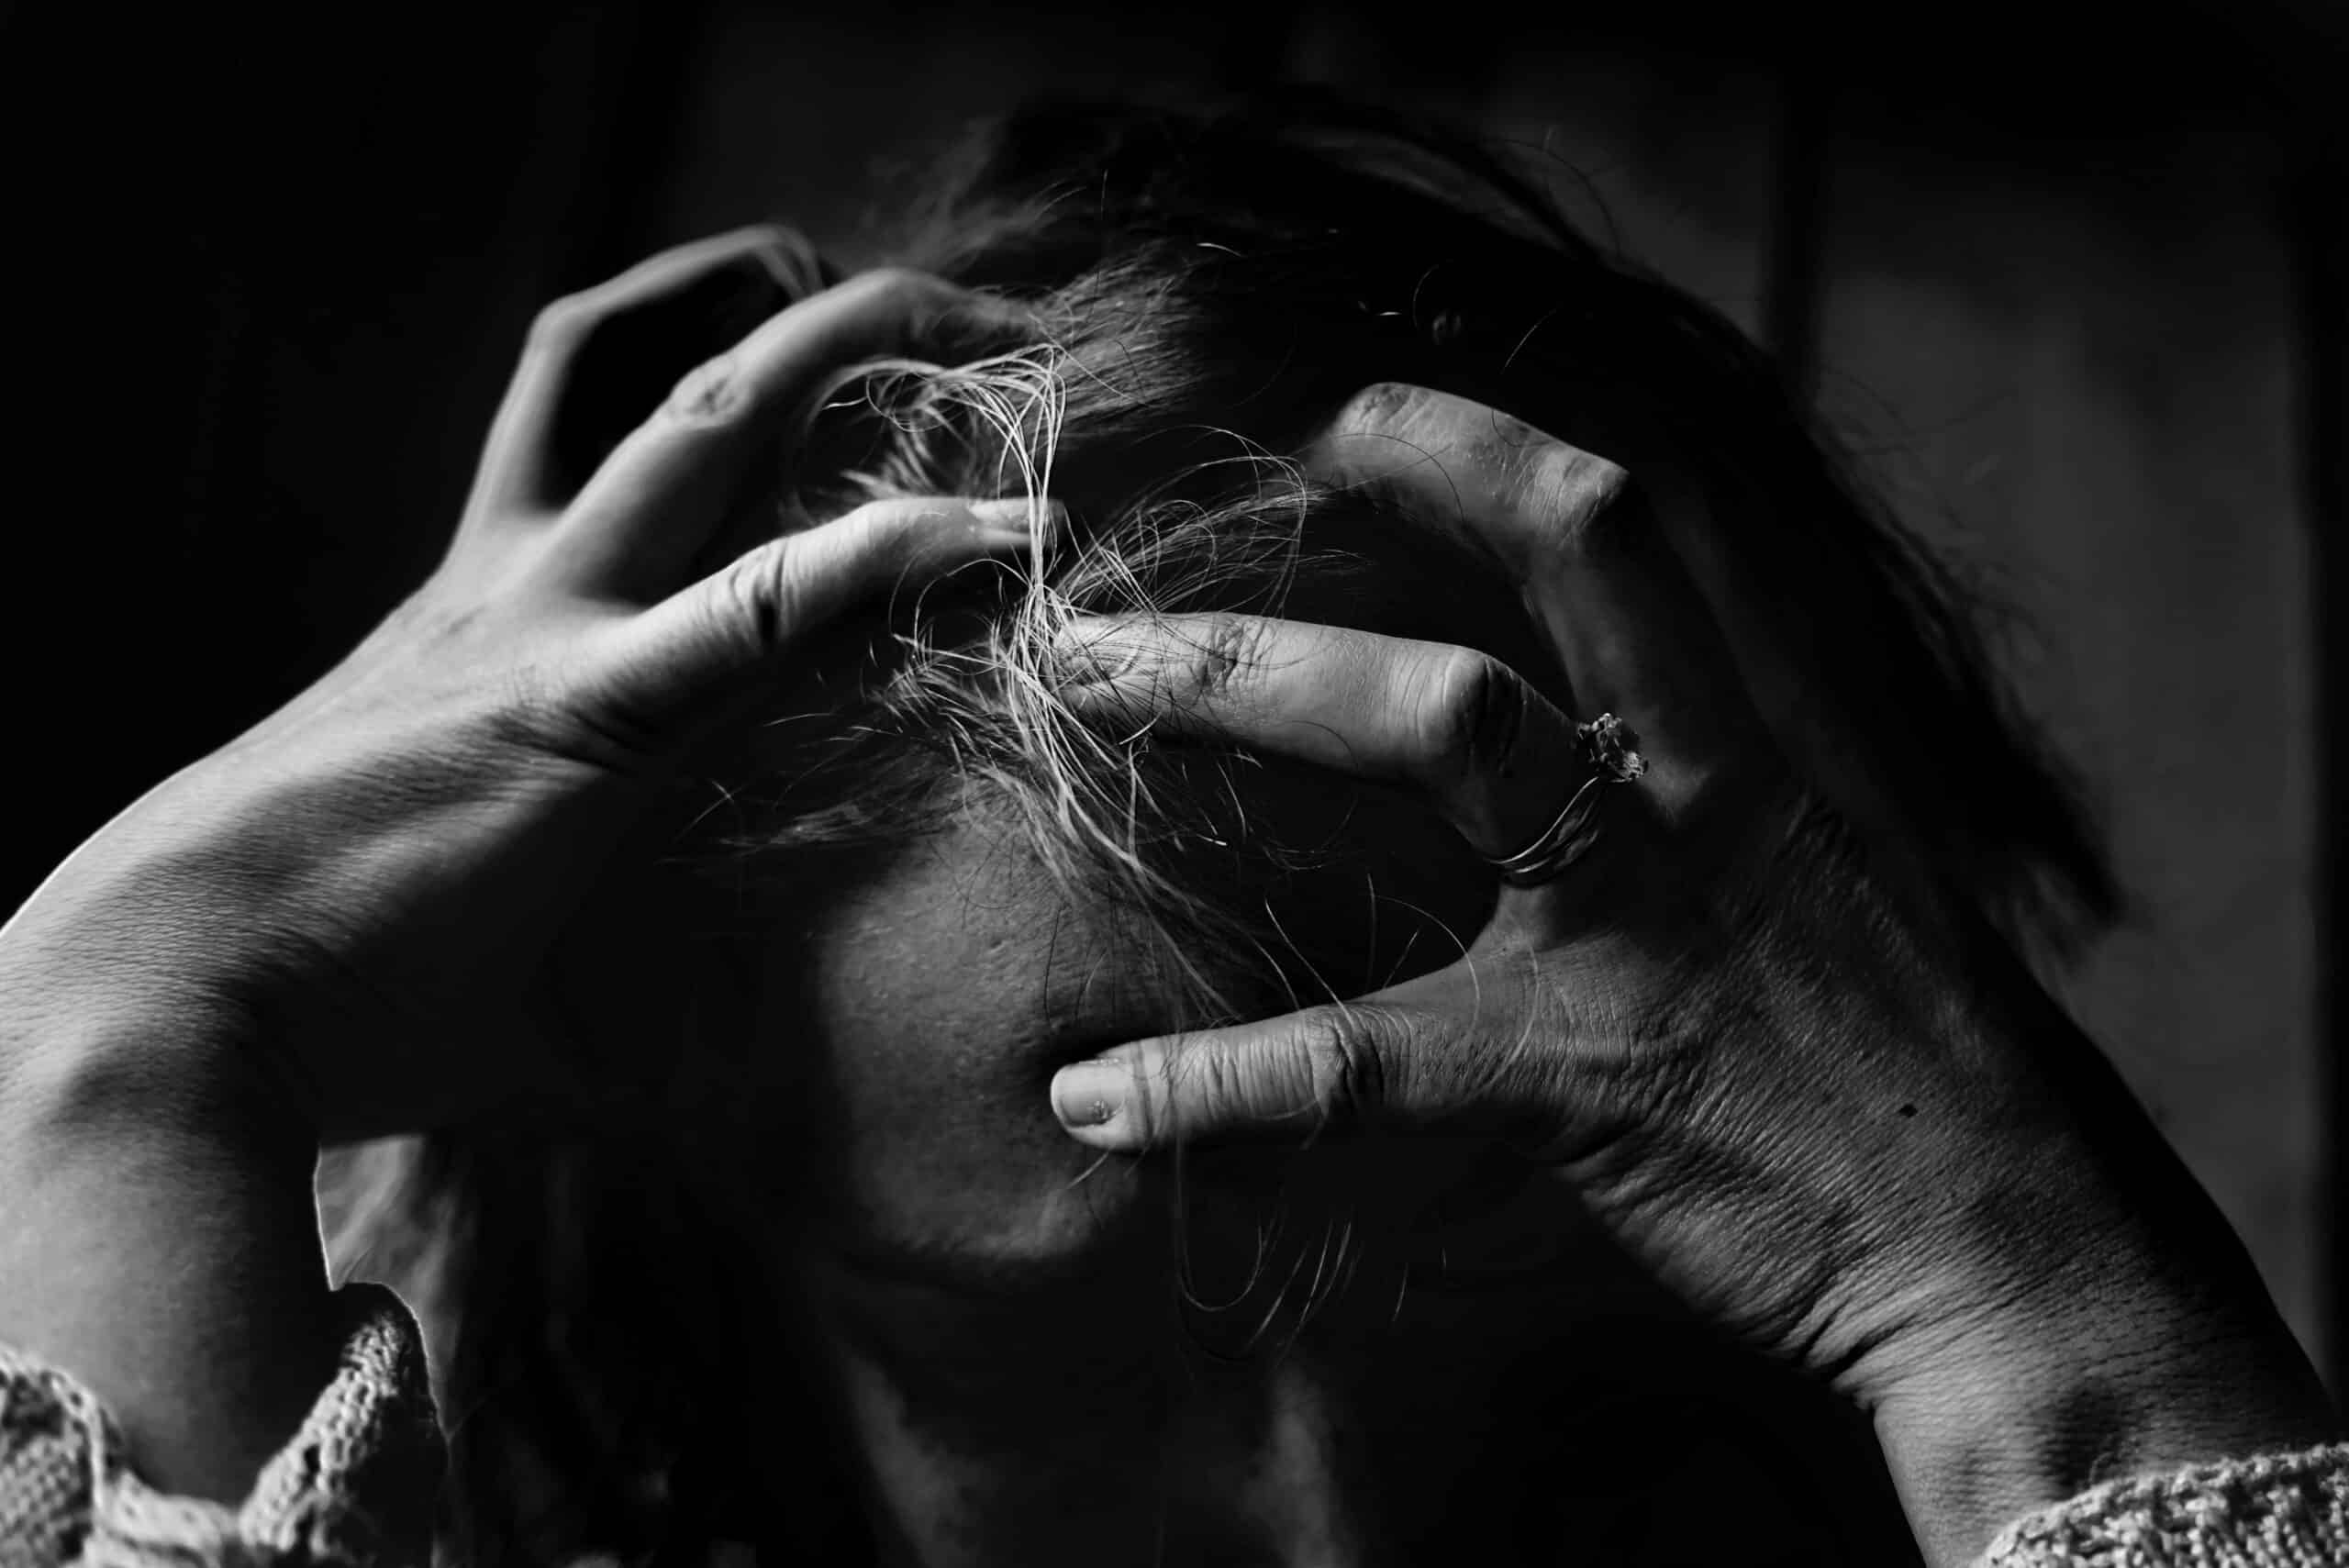 A black and white photograph of a woman sitting with her head in her hands, appearing stressed and overwhelmed